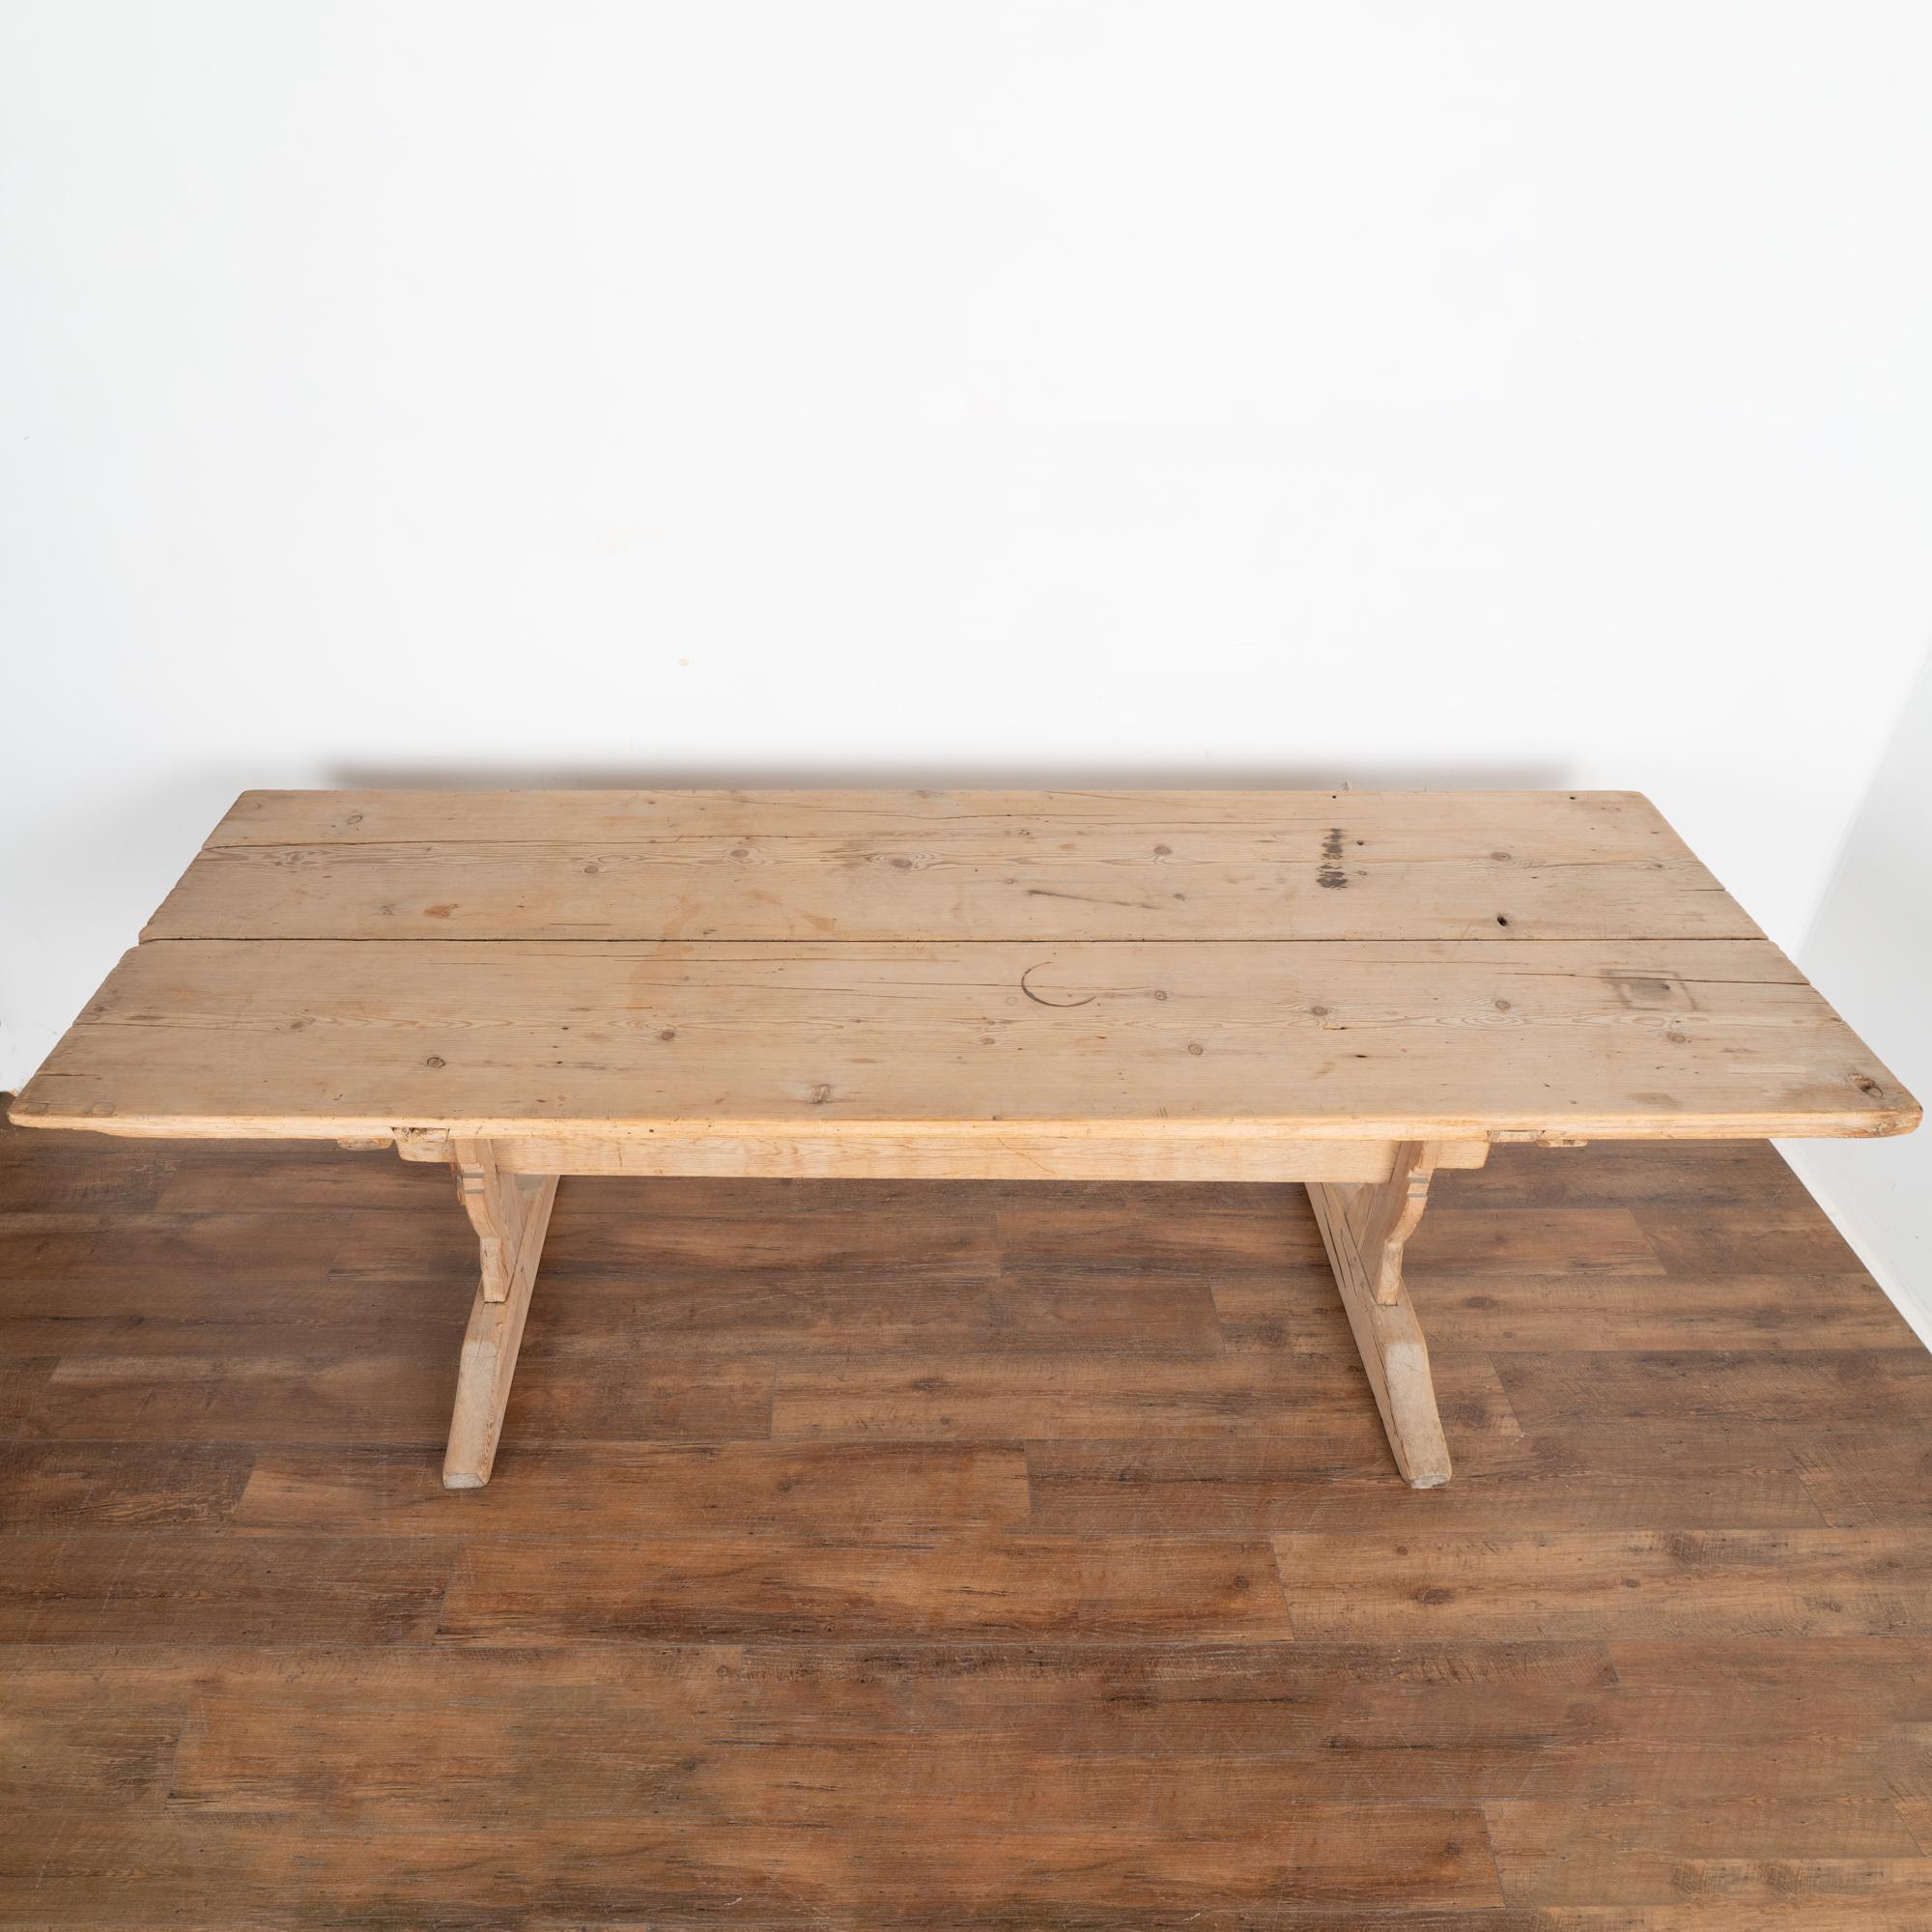 Country Pine Farm Trestle Table Dining Table from Sweden, circa 1820